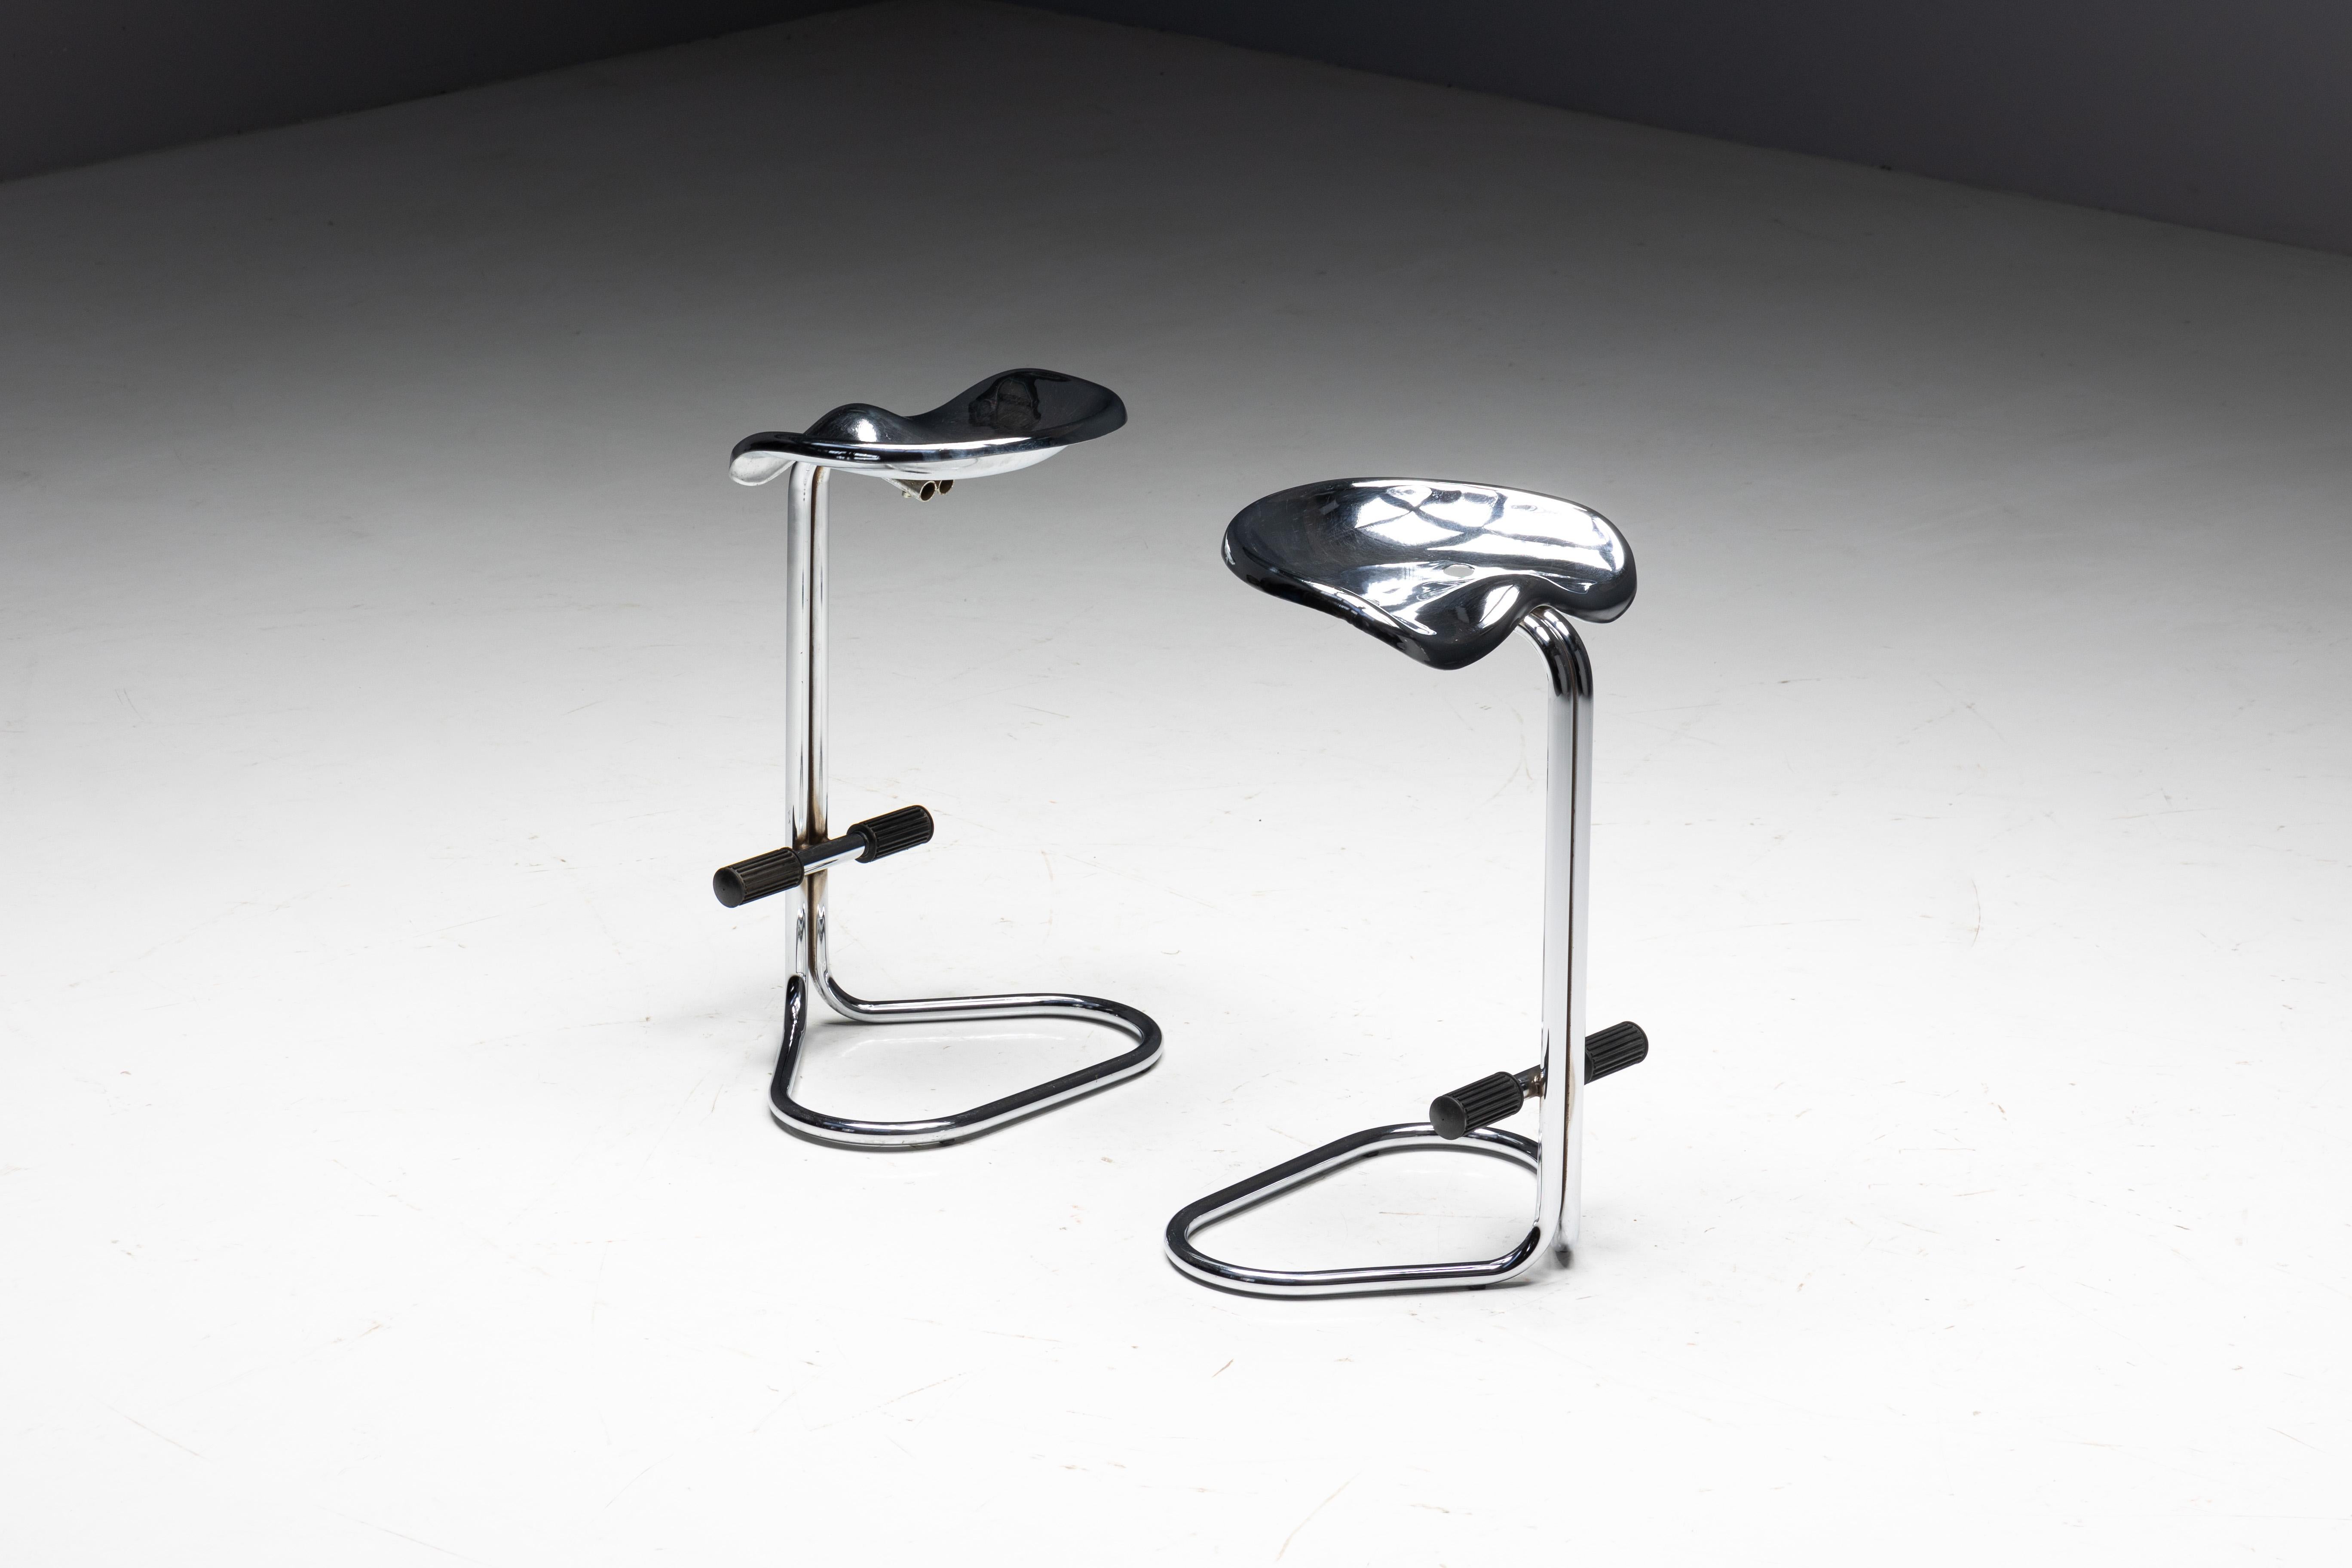 Chrome tractor stools designed by Rodney Kinsman for Bieffeplast in 1968. Crafted with a tubular chromed steel base and adorned with a sleek chromed steel tractor seat, this stool exudes both fun and exclusivity. Its enduring appeal and great